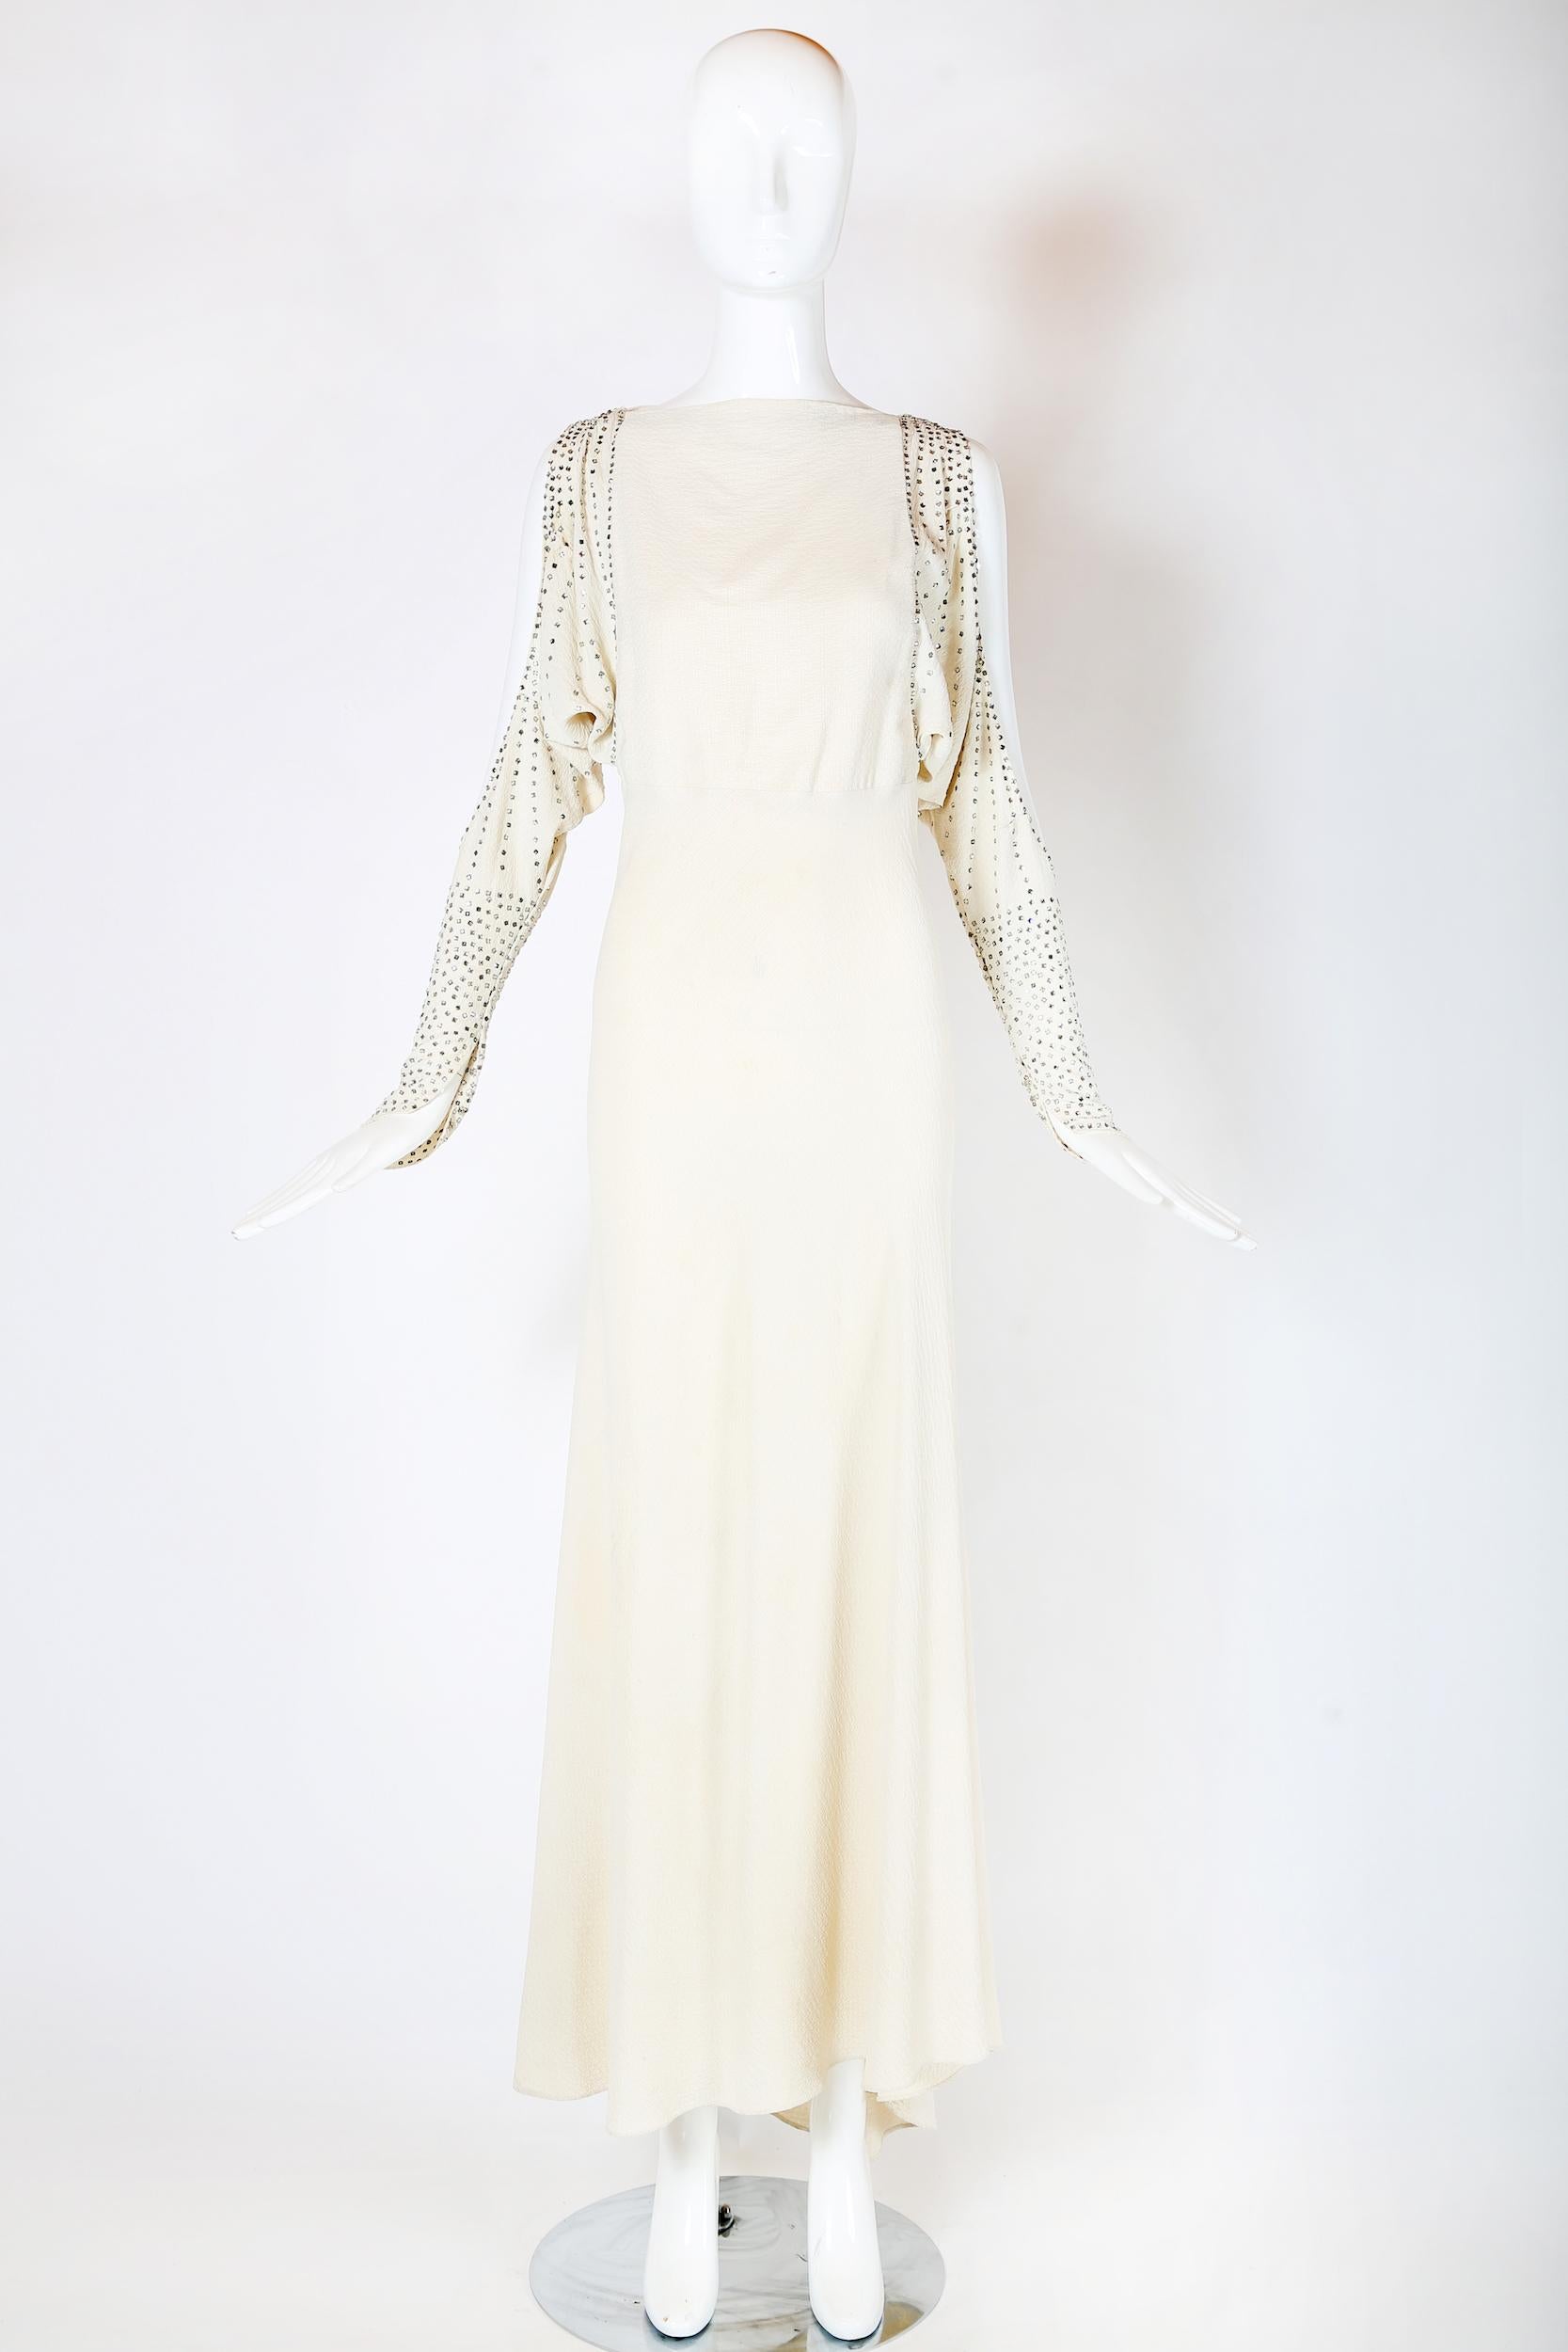 A 1930's bias cut puckered silk off-white goddess gown with cutouts at the back and sleeves. Studded with rhinestones at the sleeves and shoulder. In good vintage condition with some scattered invisible repairs, light marks, a tiny almost